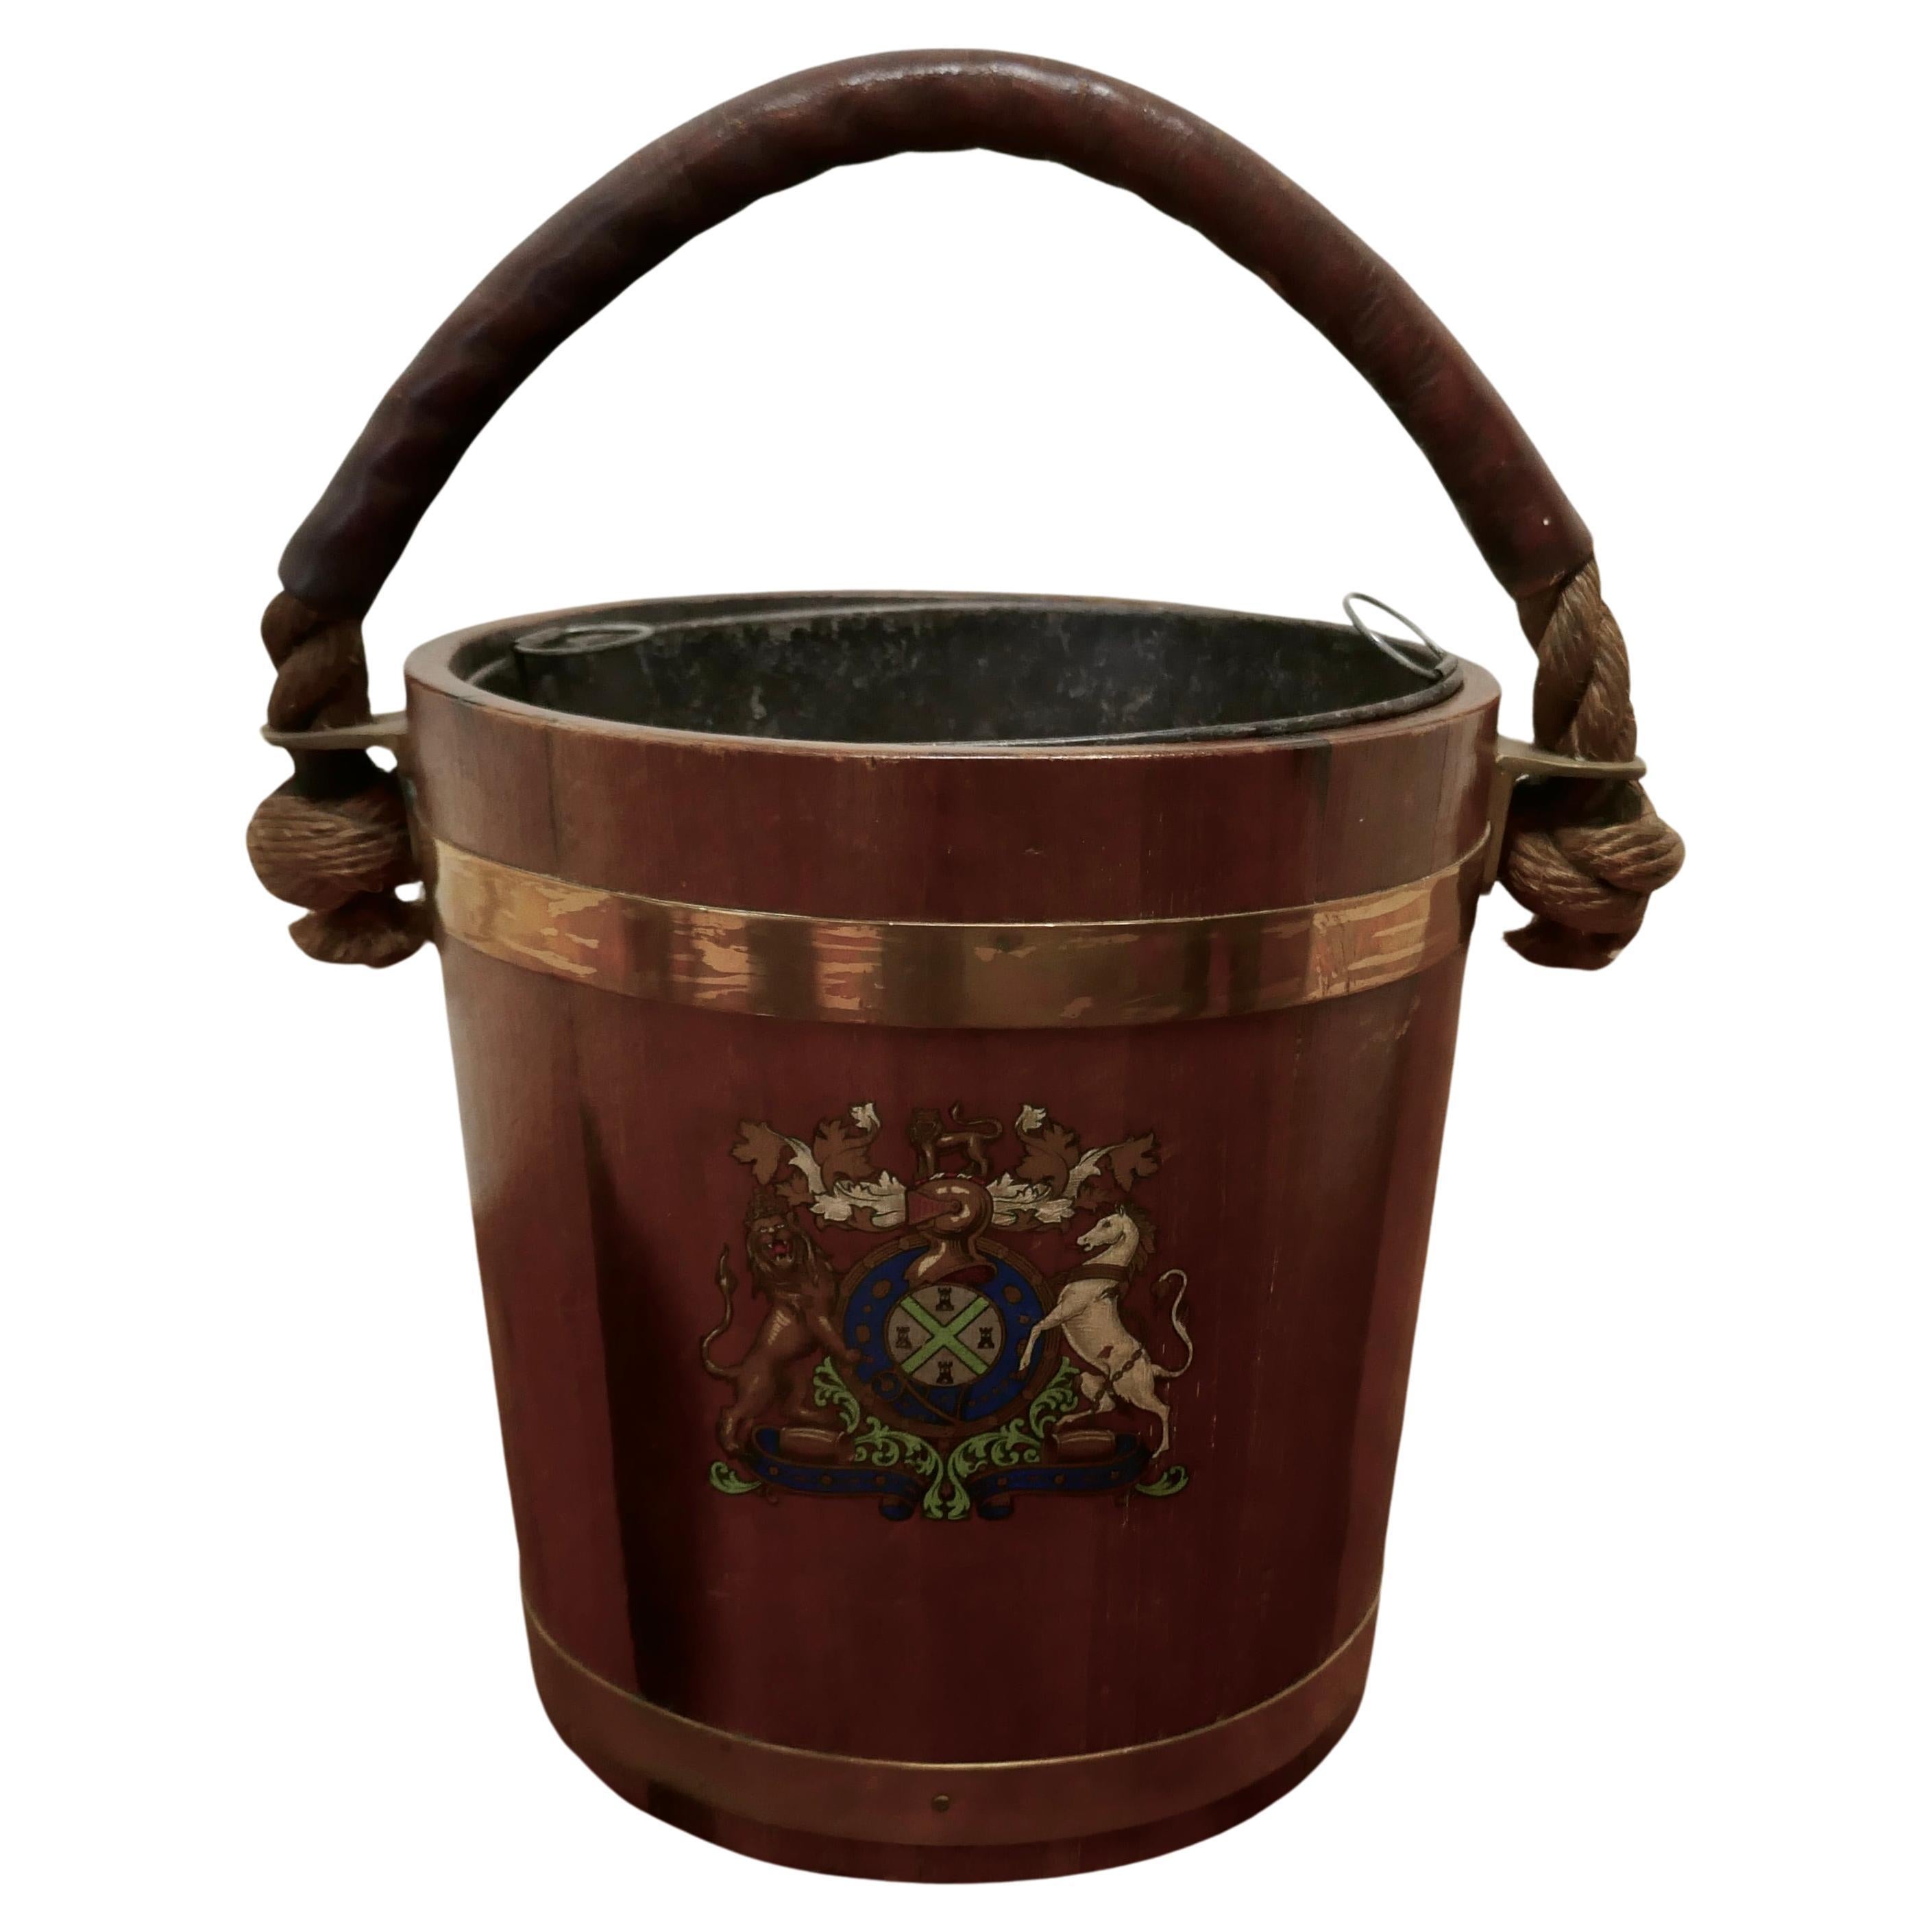 What is a leather fire bucket used for?